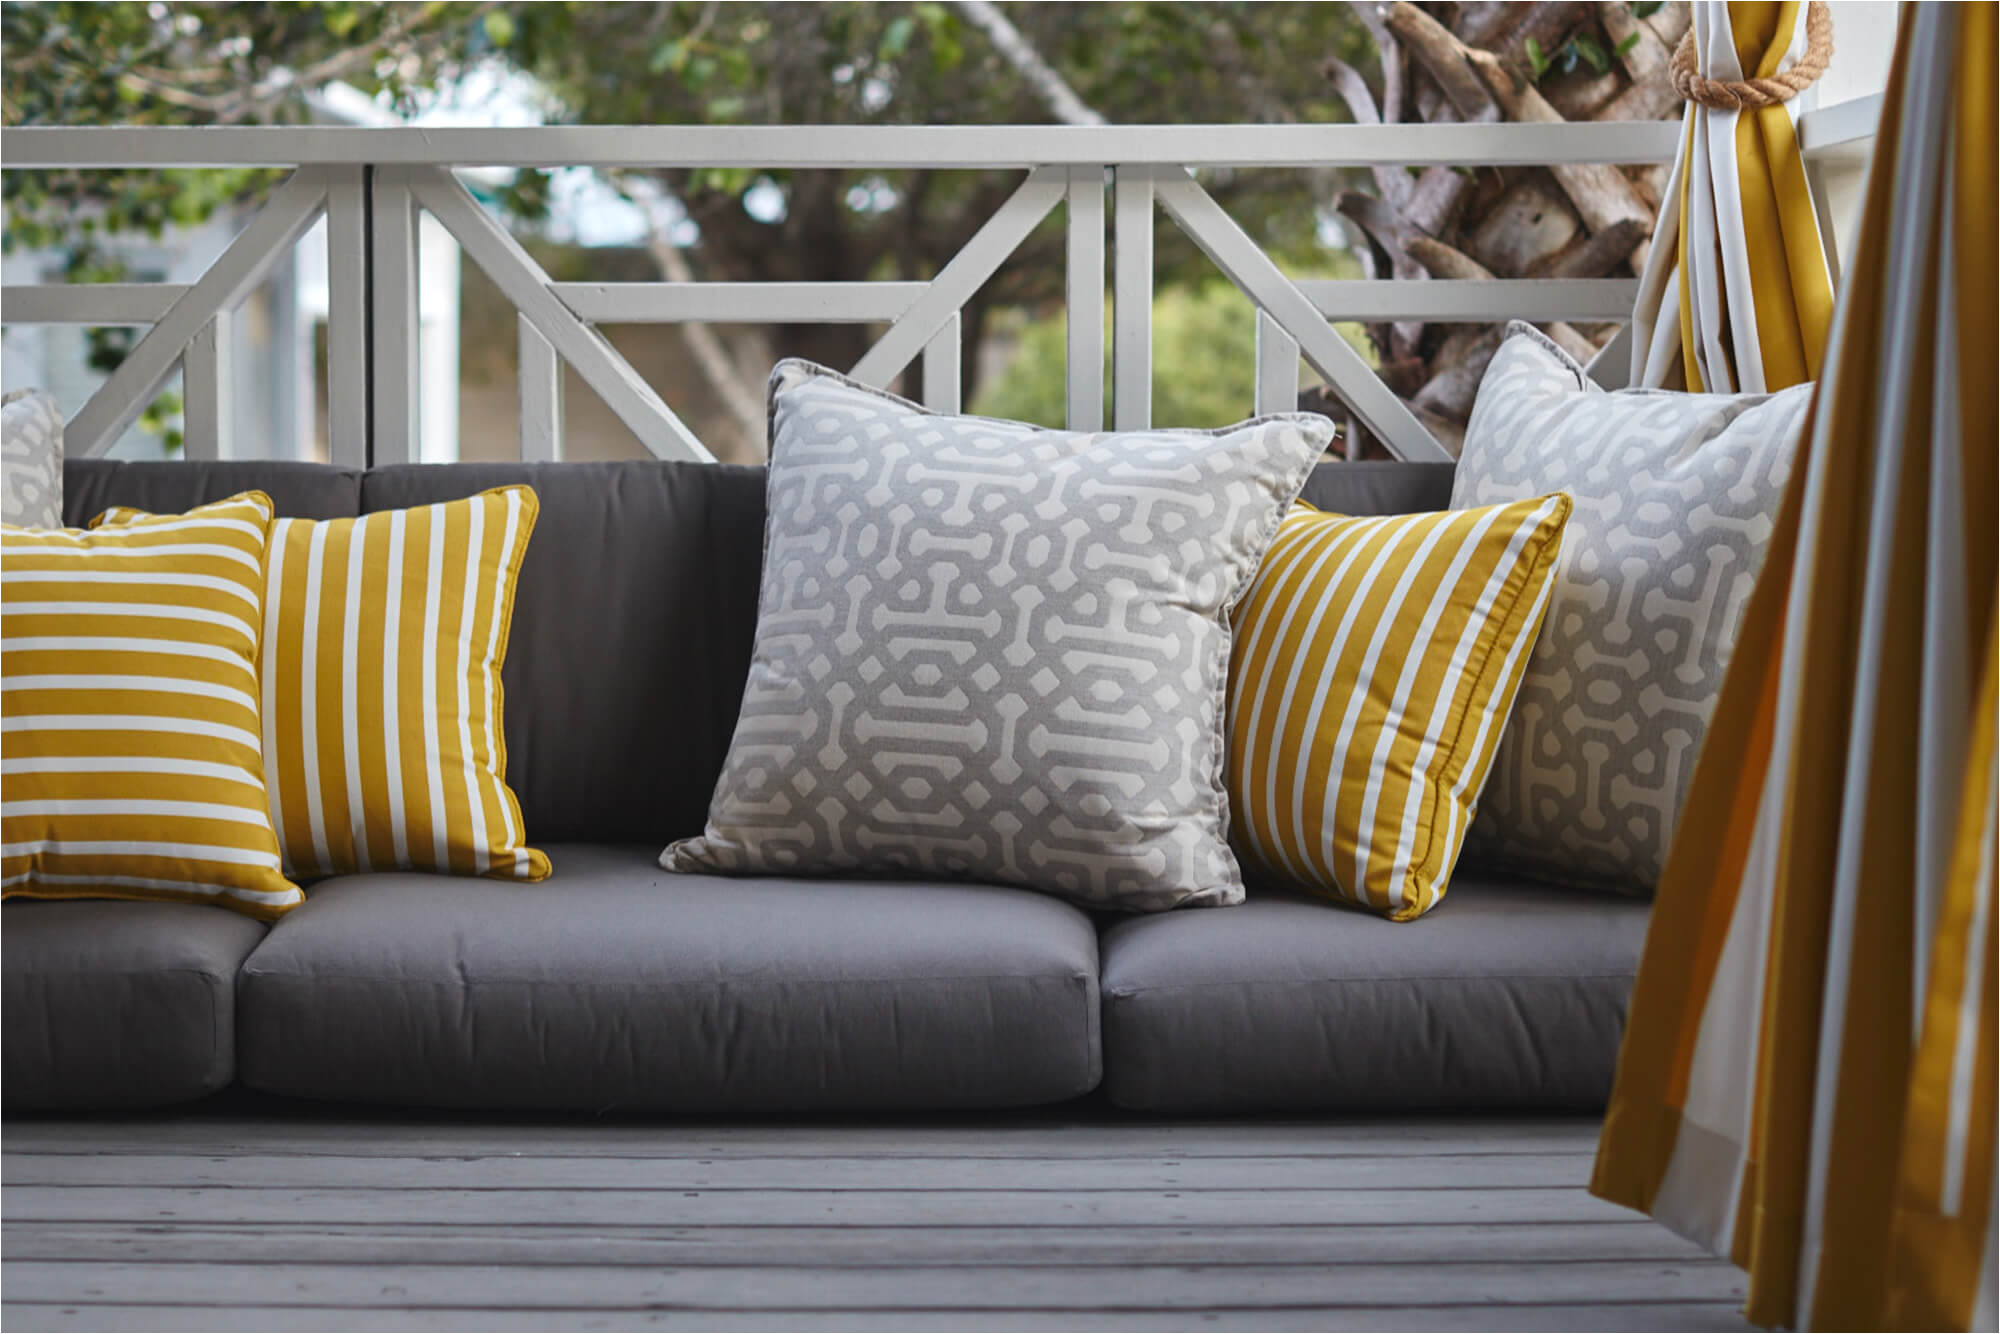 grey outdoor cushions with yellow and grey decorative pillows and yellow drapery